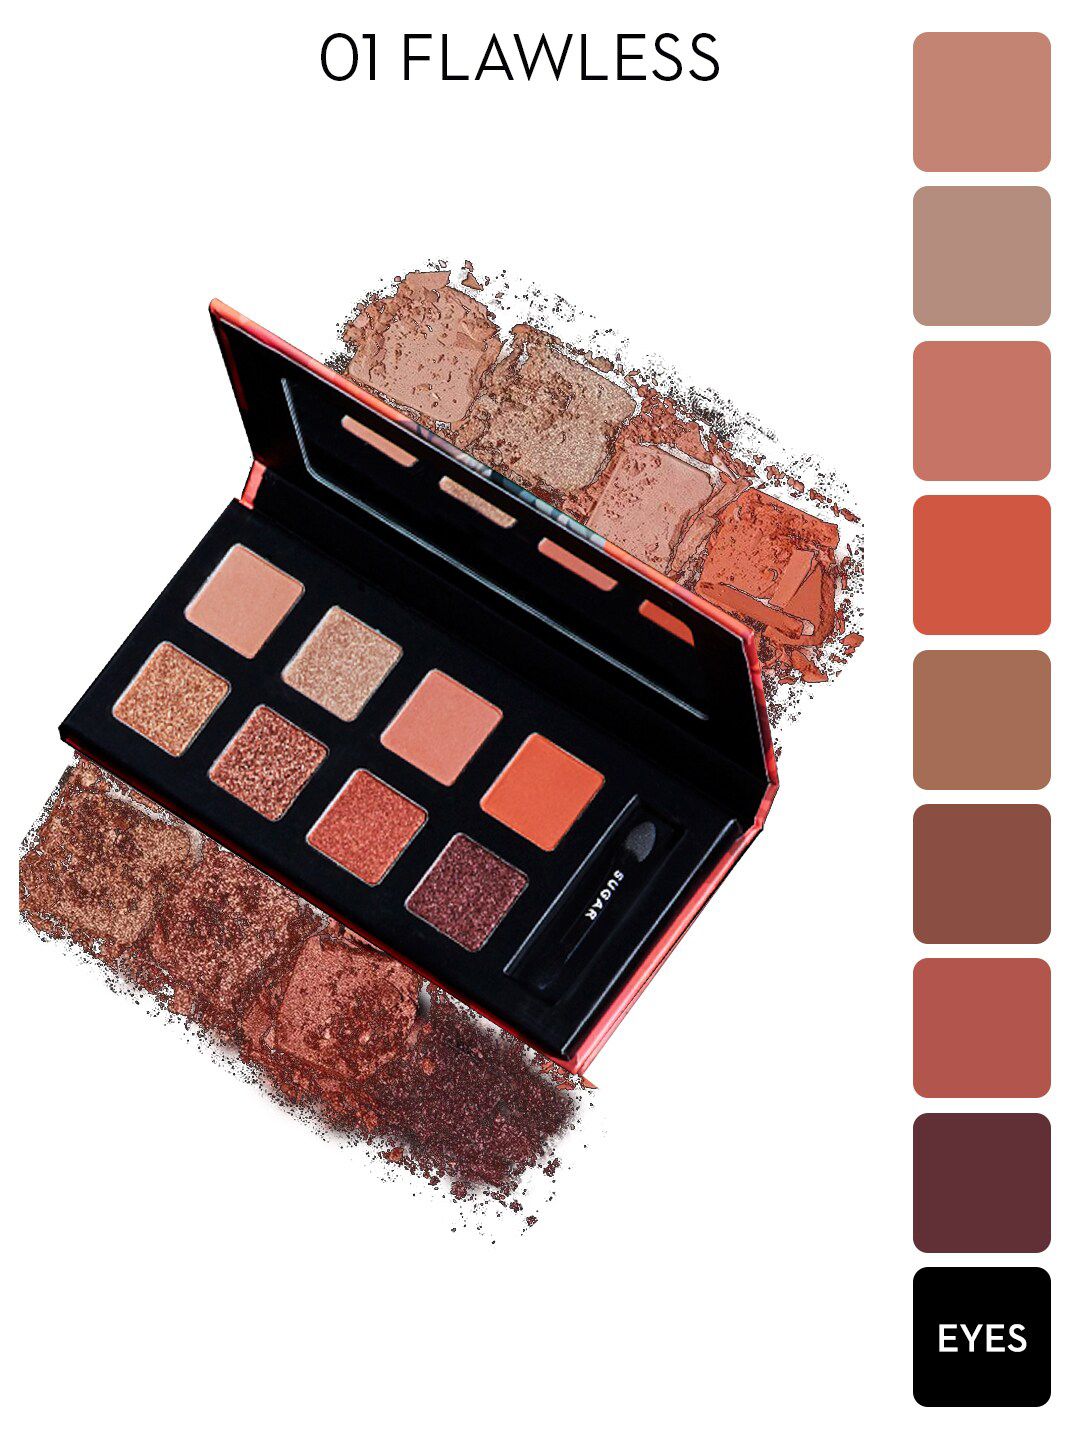 SUGAR Cosmetics Blend The Rules Eyeshadow Palette - 01 Flawless Price in India